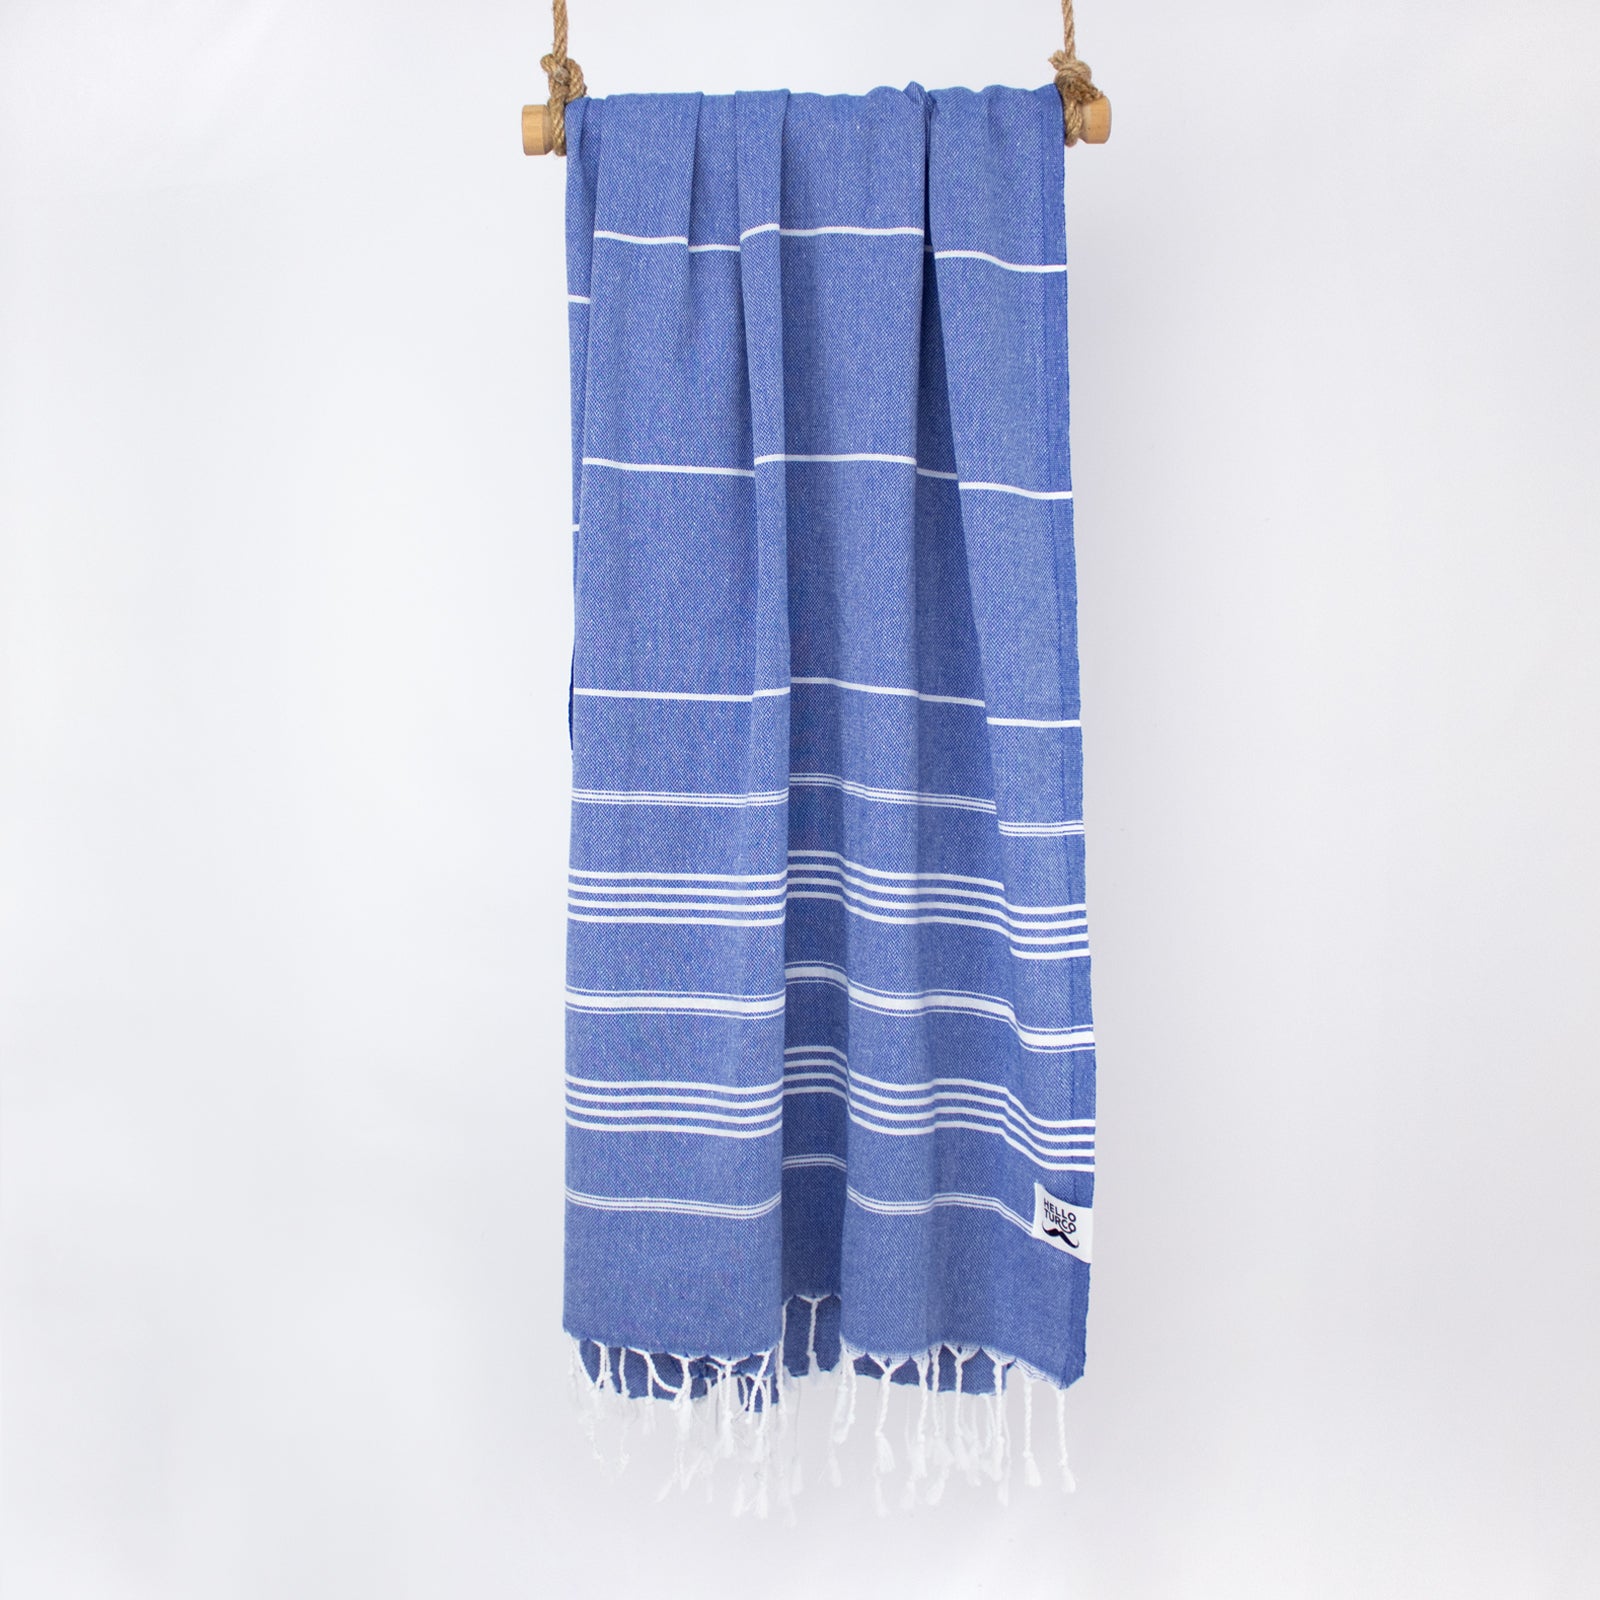 "SALTY HAIR DON'T CARE" Embroidered Turkish Towel